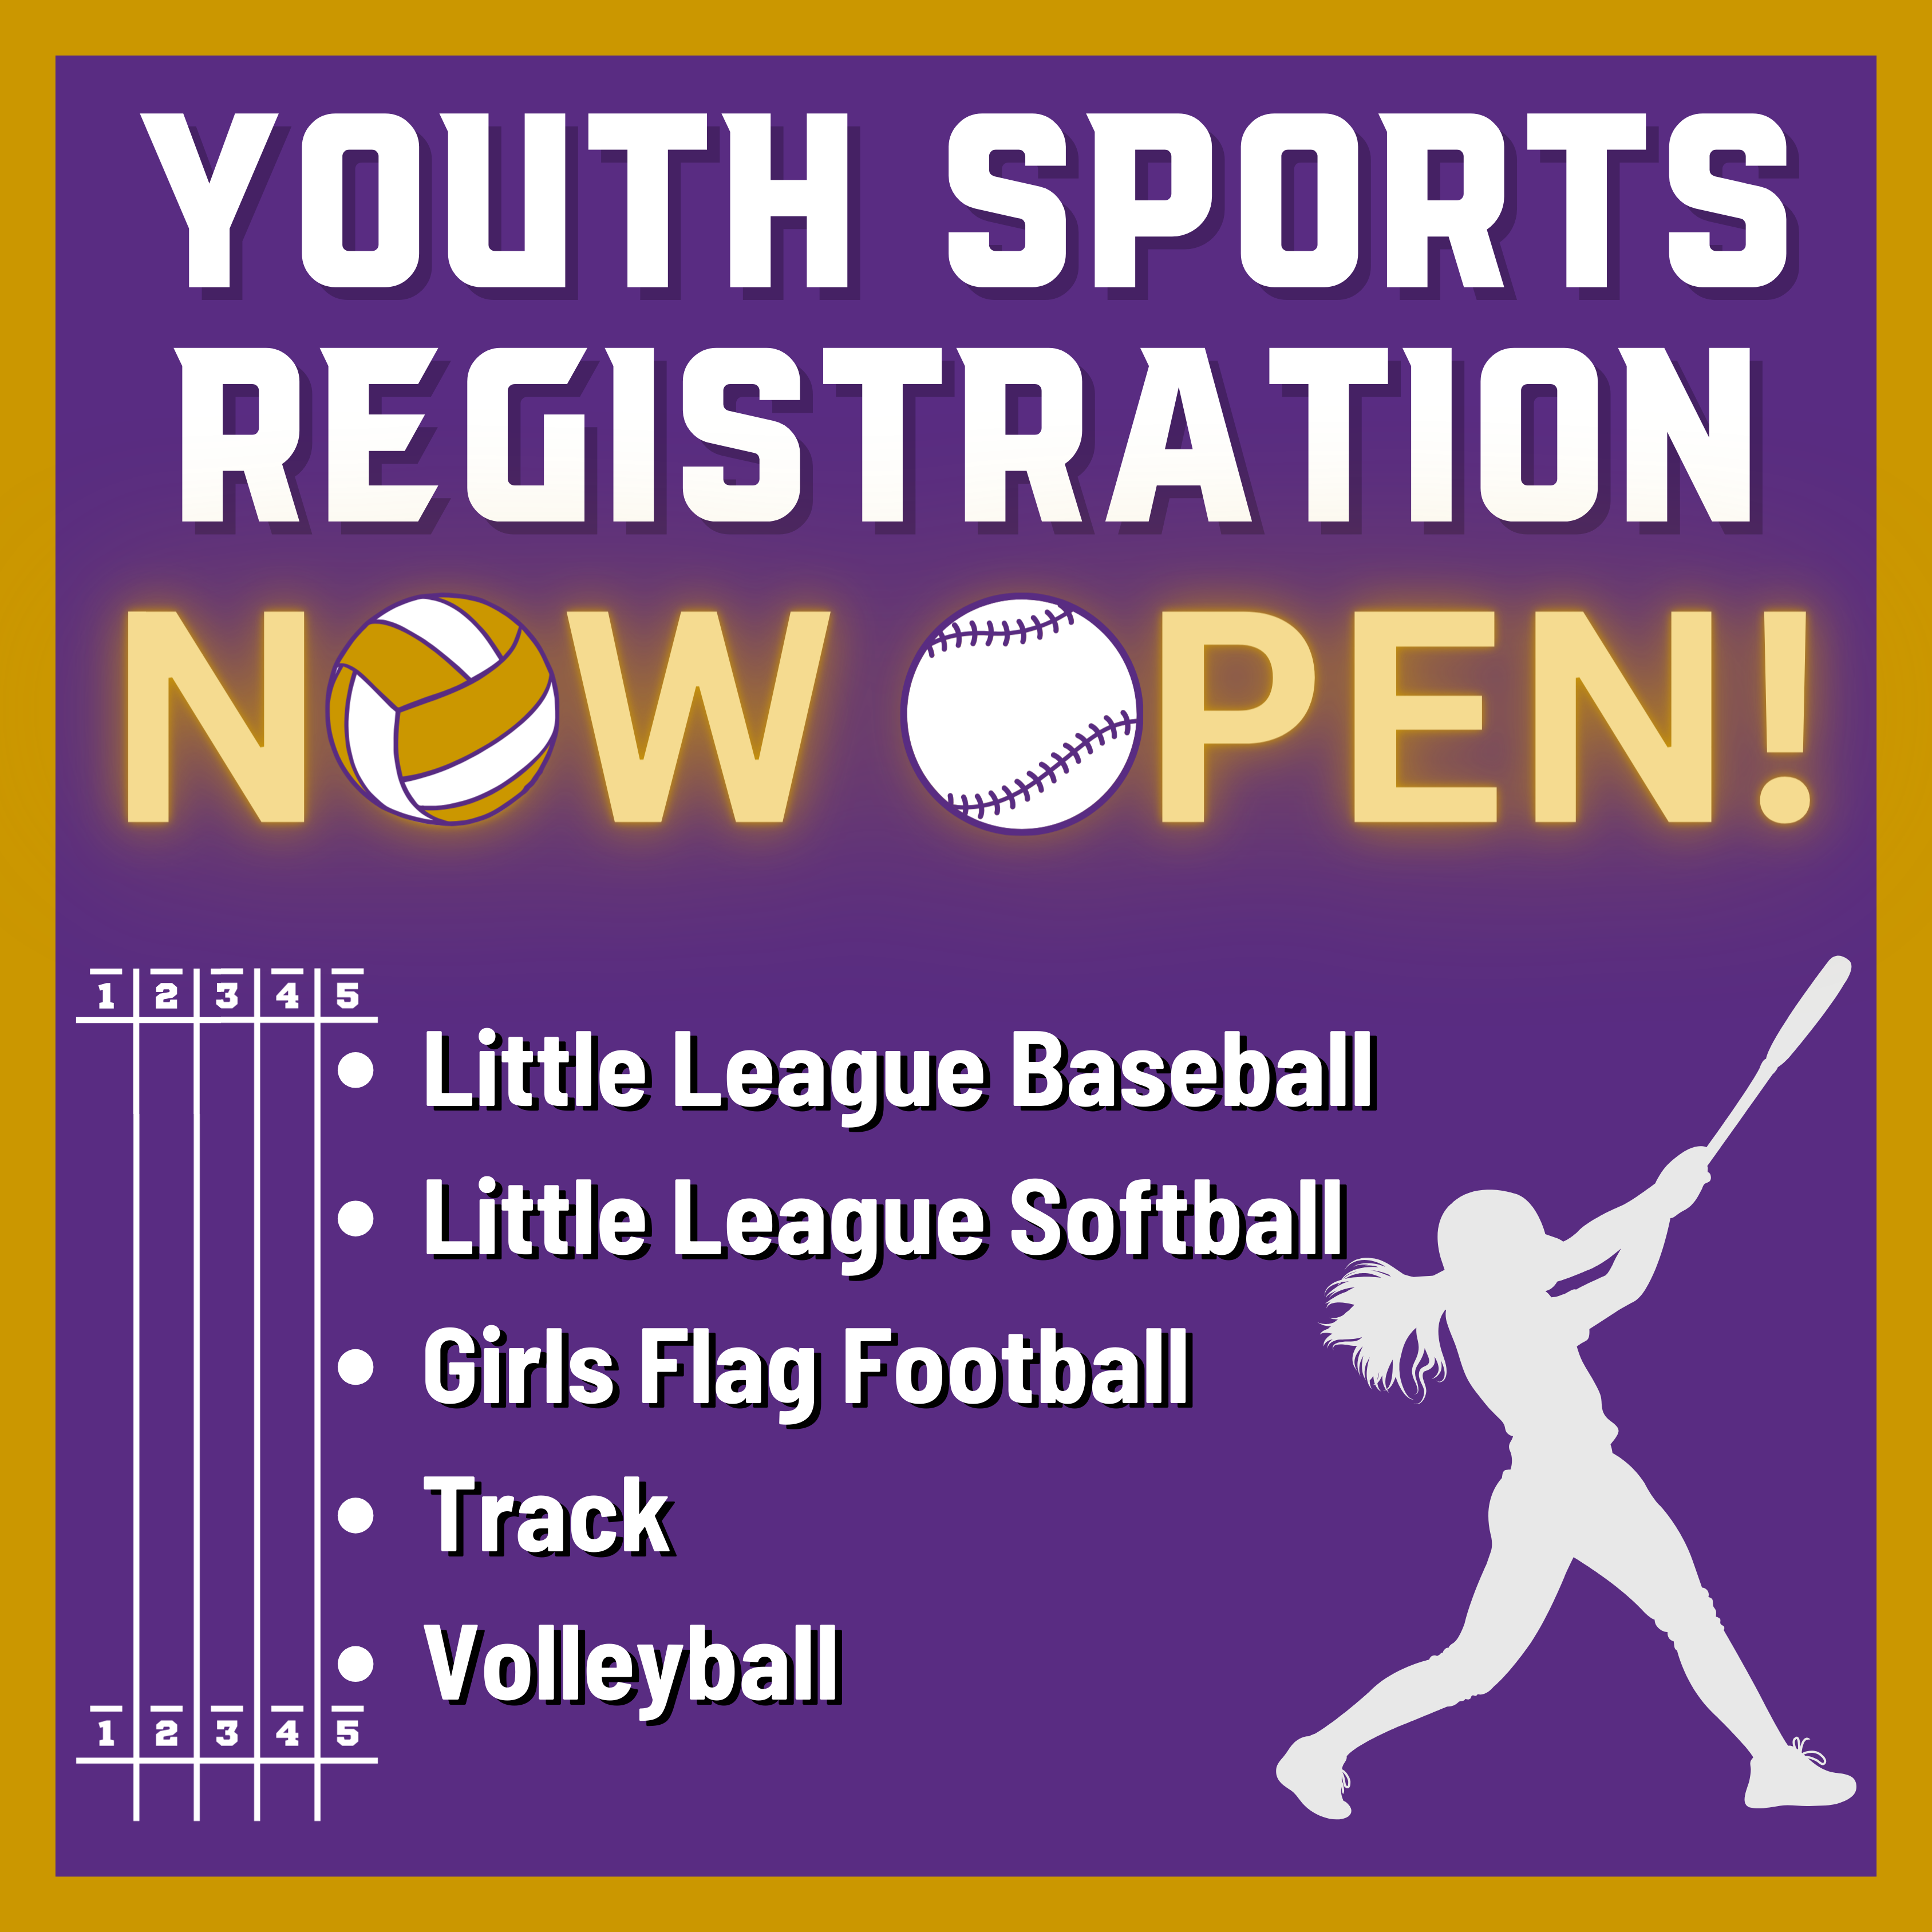 Youth Sports registration